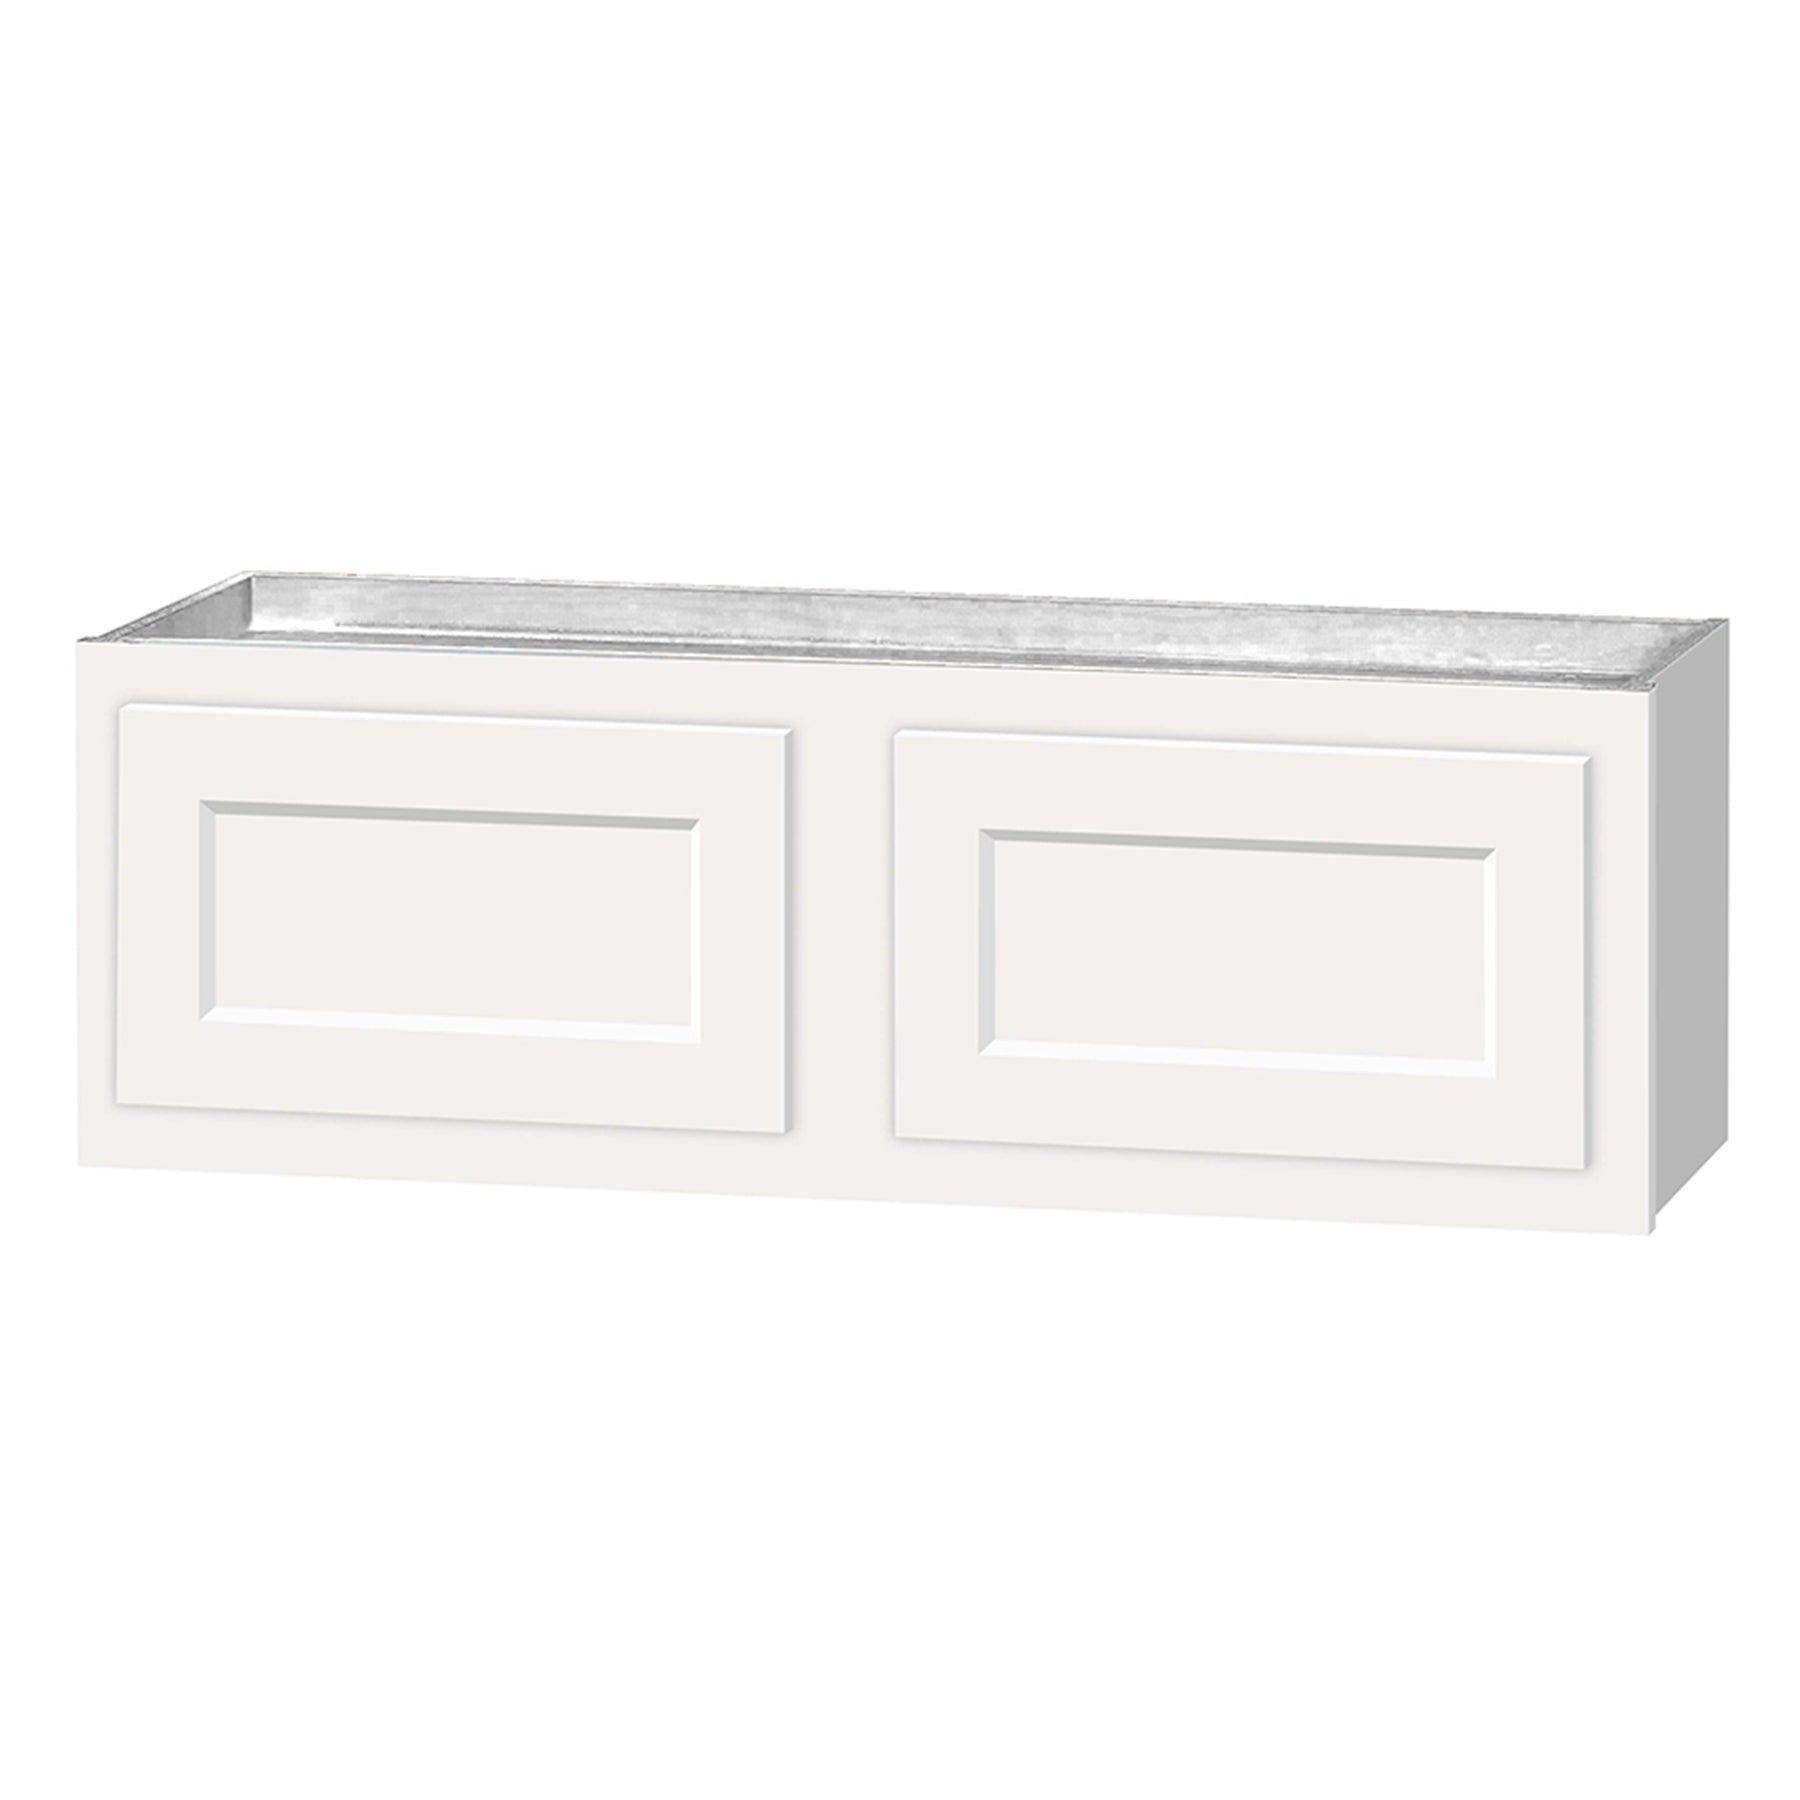 12 inch Wall Cabinets - Dwhite Shaker - 36 Inch W x 12 Inch H x 12 Inch D